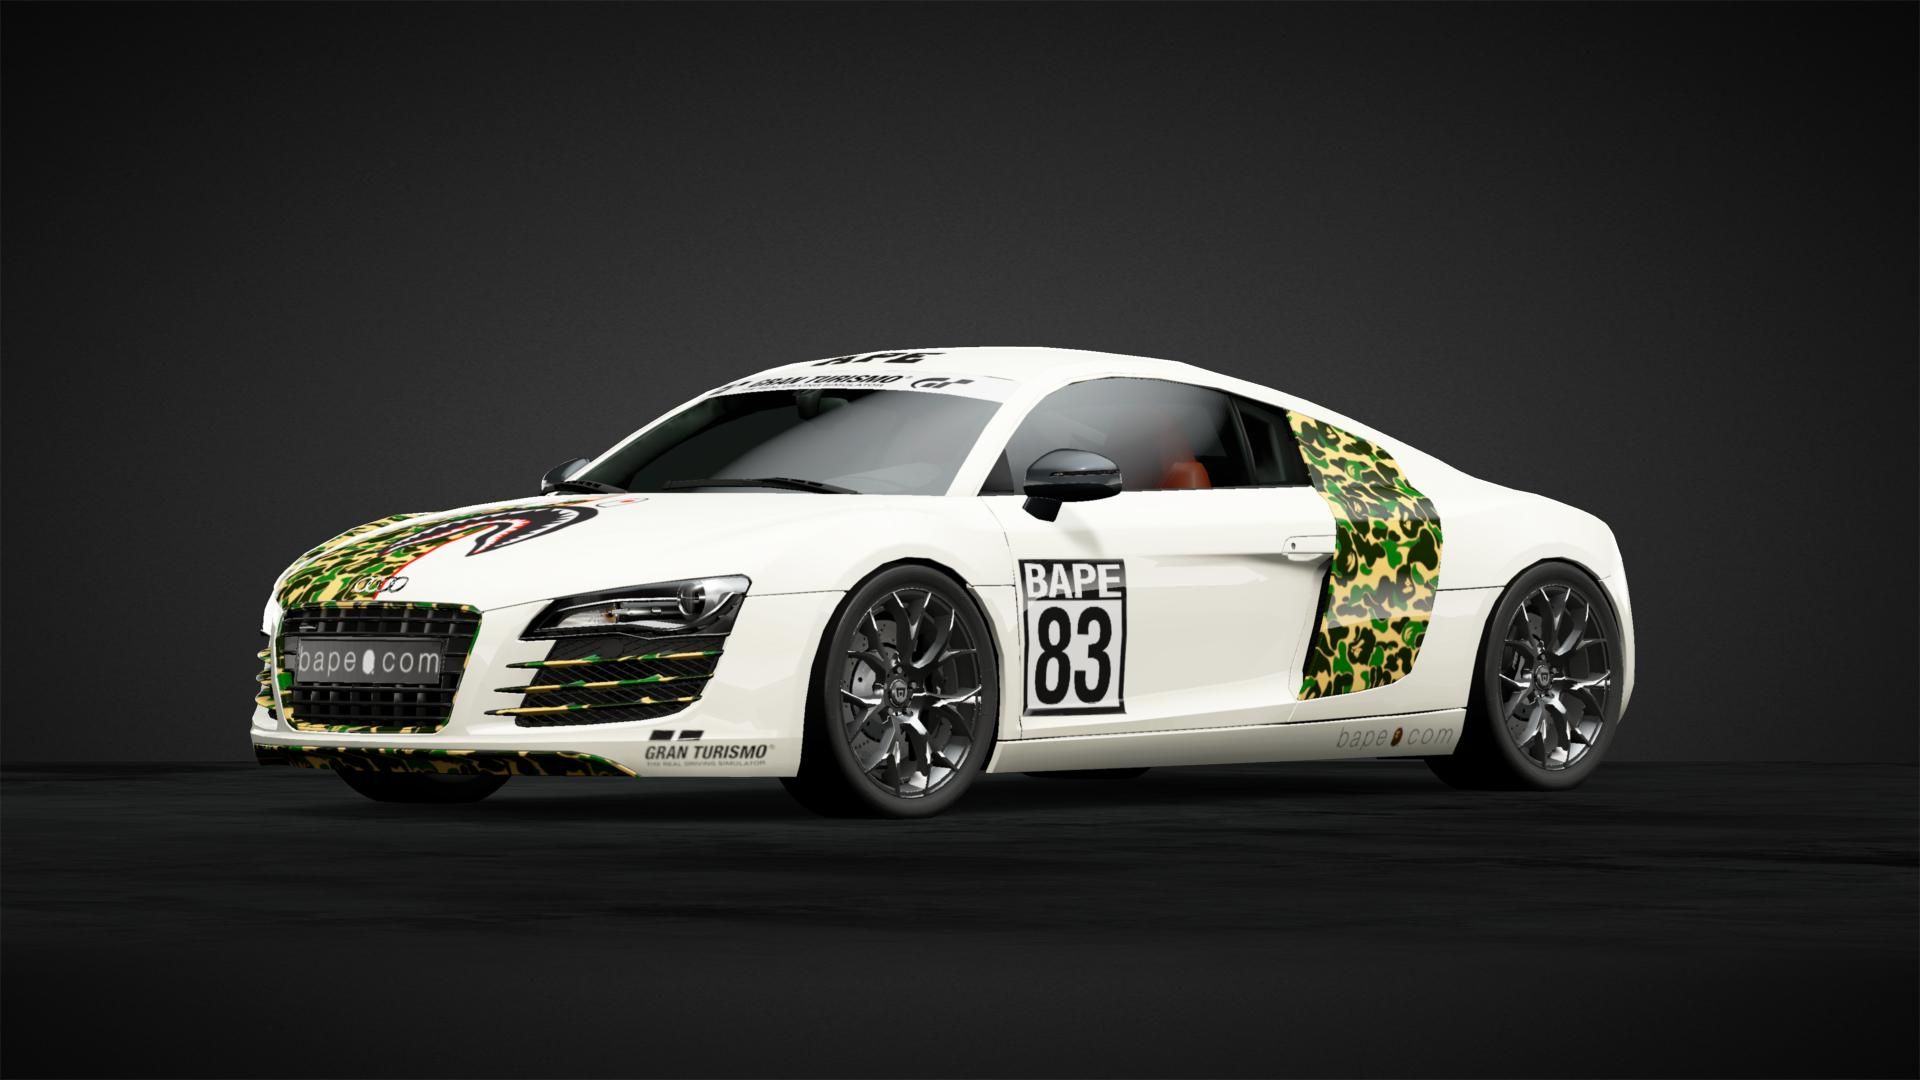 A Bathing Ape Audi Livery by yung_turismo. Community. Gran